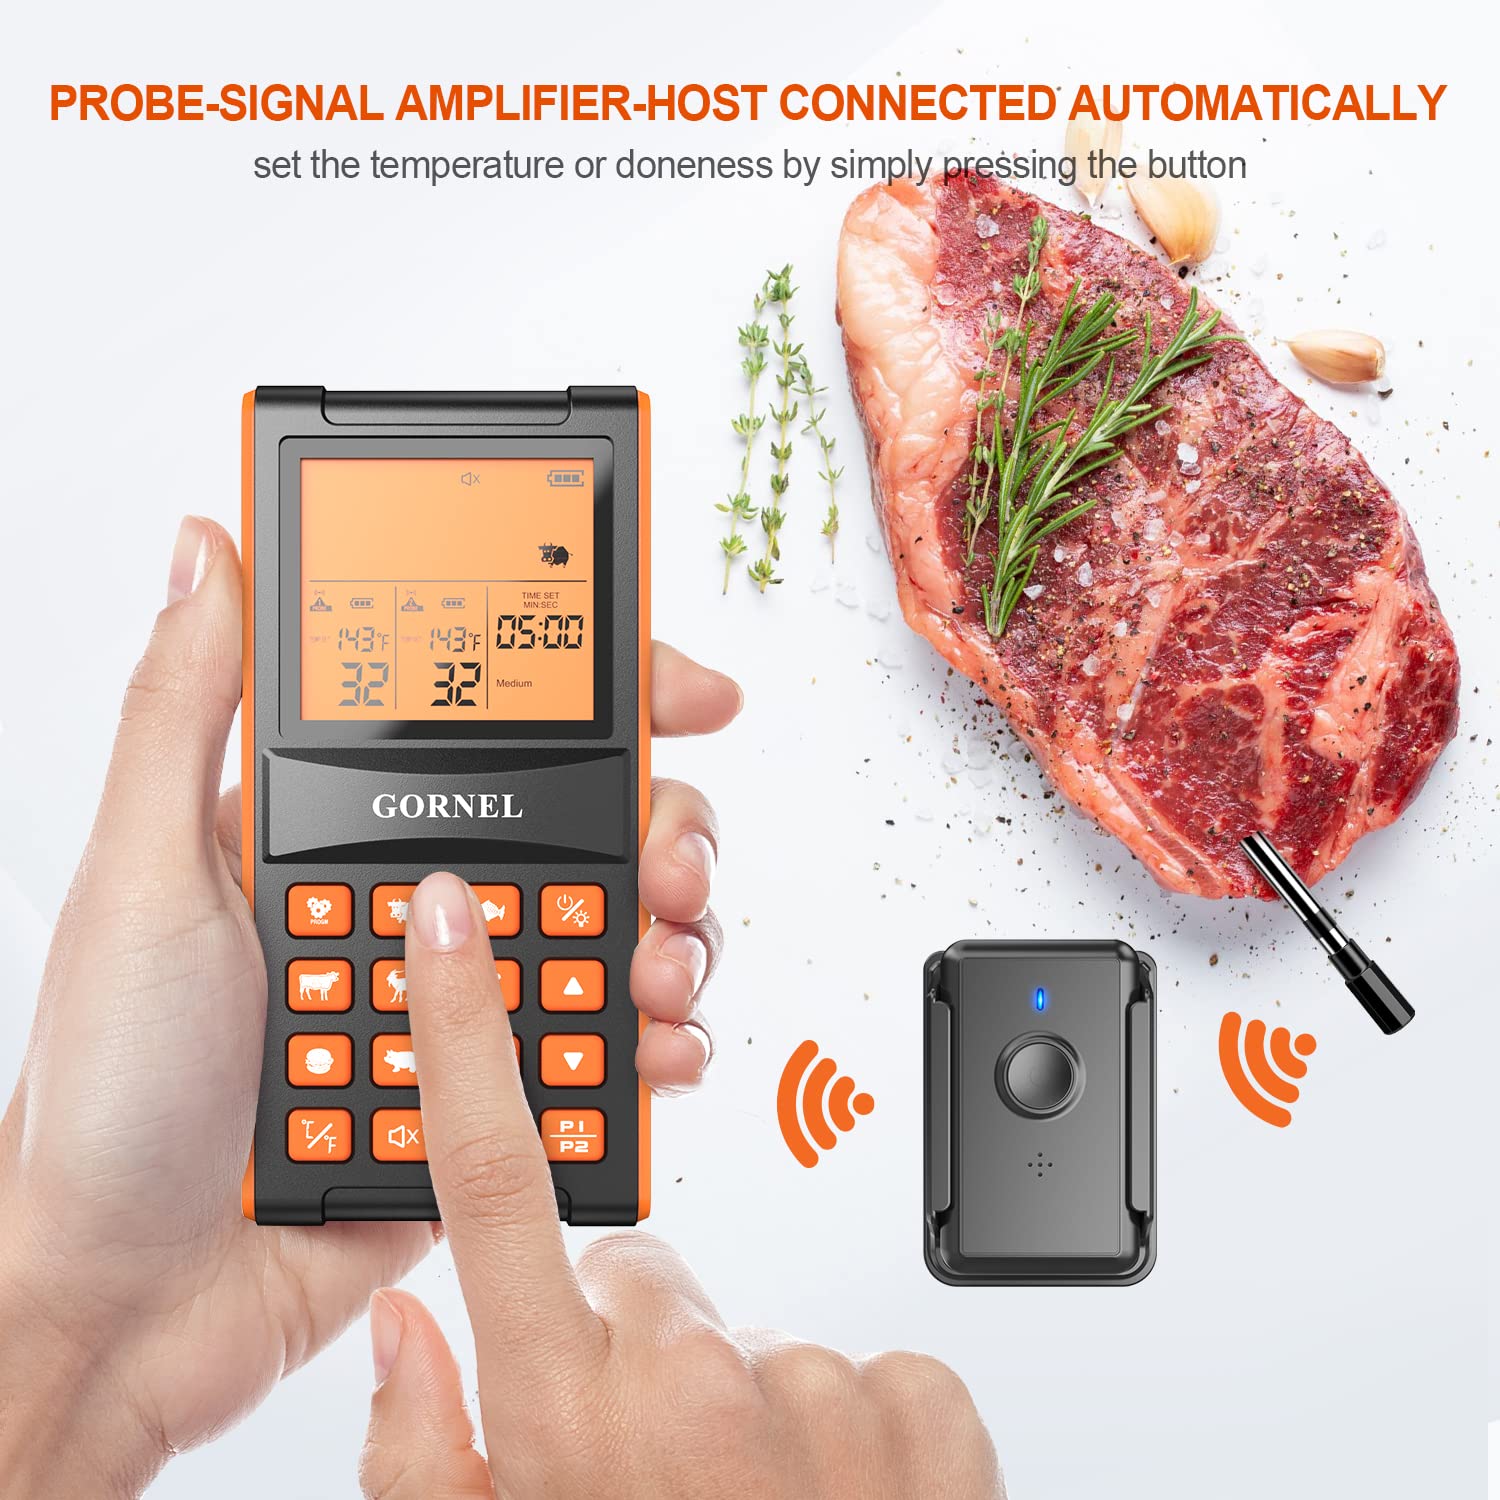 GORNEL Wireless Meat Thermometer – Digital Cooking Thermometer with 2 Probes – 300Ft Remote Range Food Thermometer – IP65 Waterproof Probes – Preprogrammed Temperatures - Ideal for BBQ, Oven, Grill